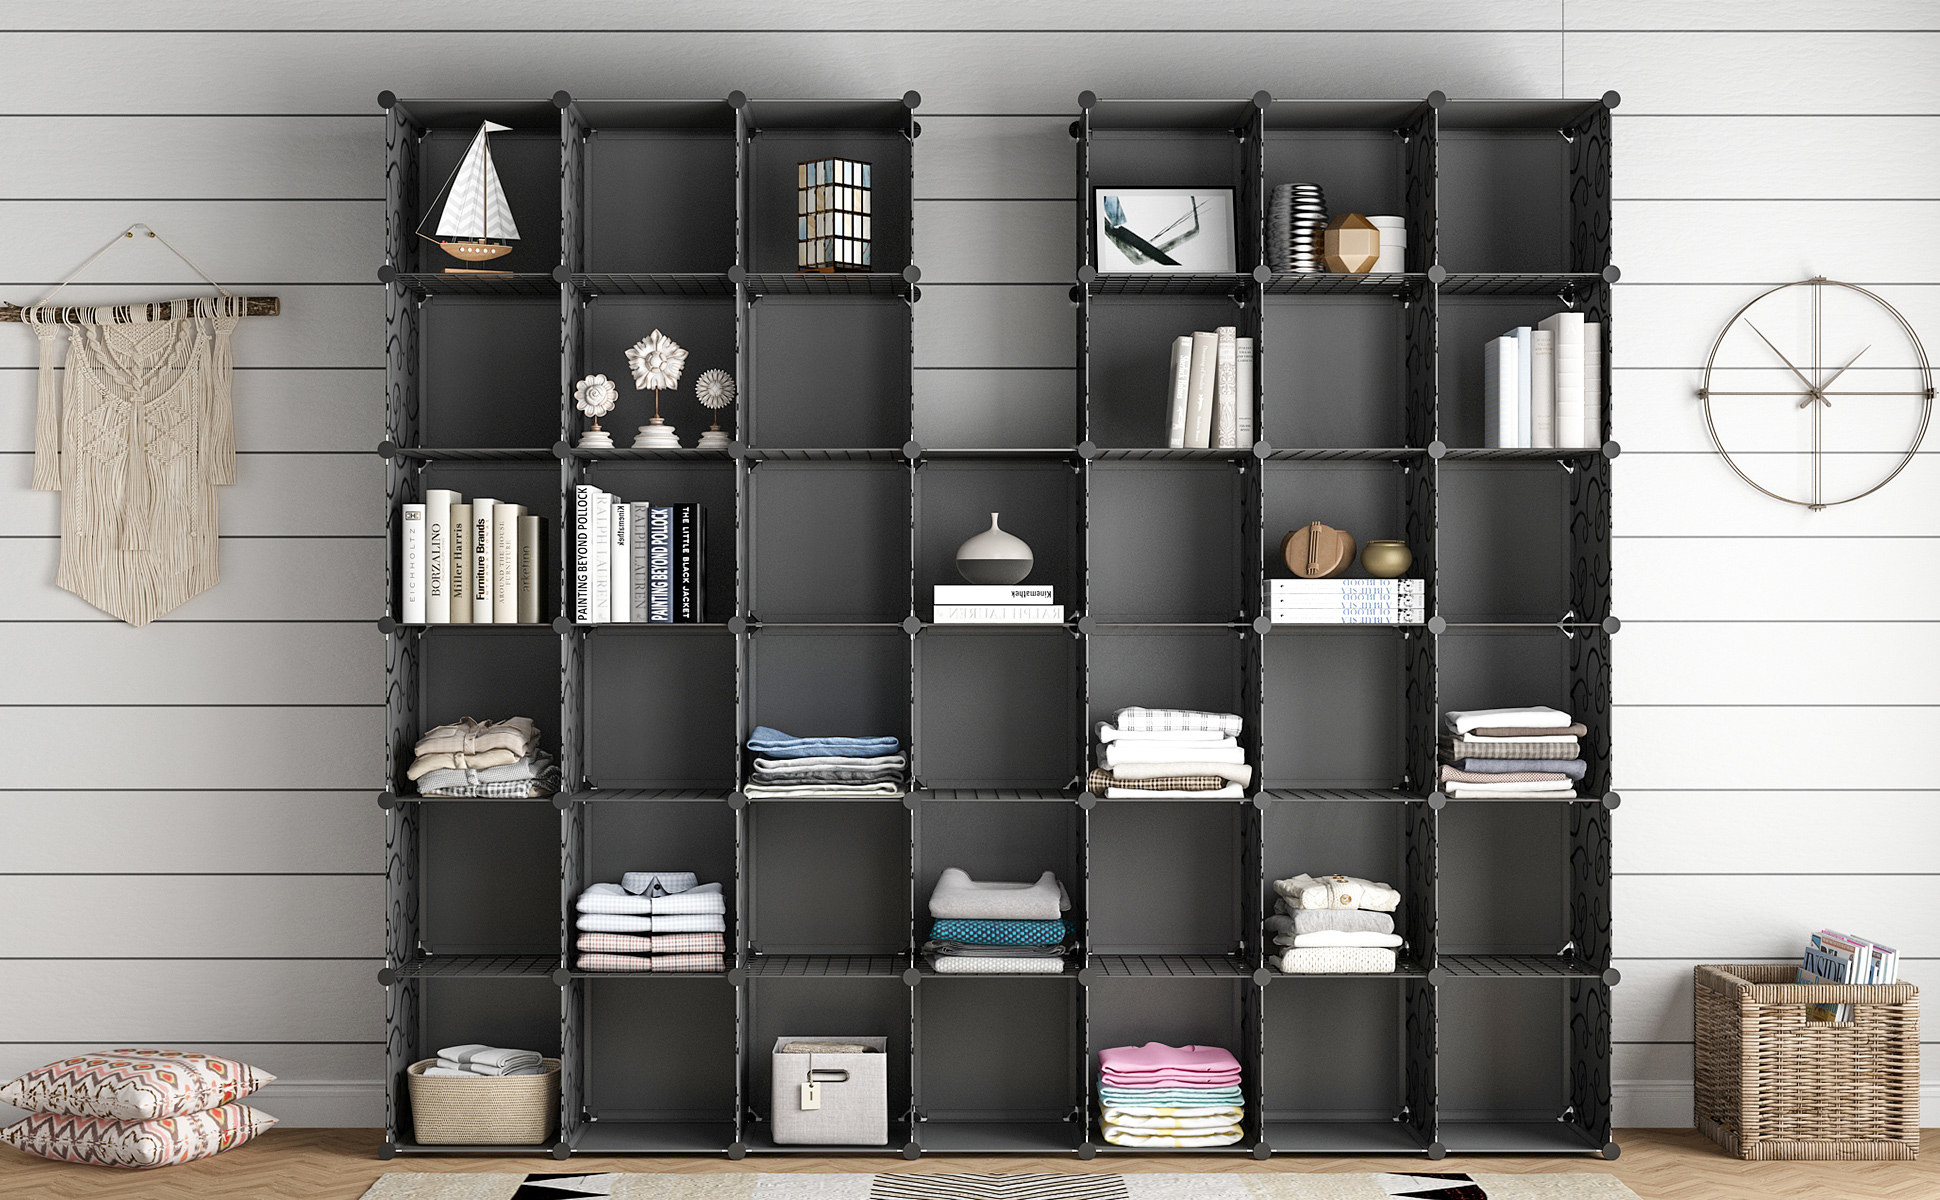 The large set of cubby shelves in gray, storing a mix of trinkets, books, and folded shirts